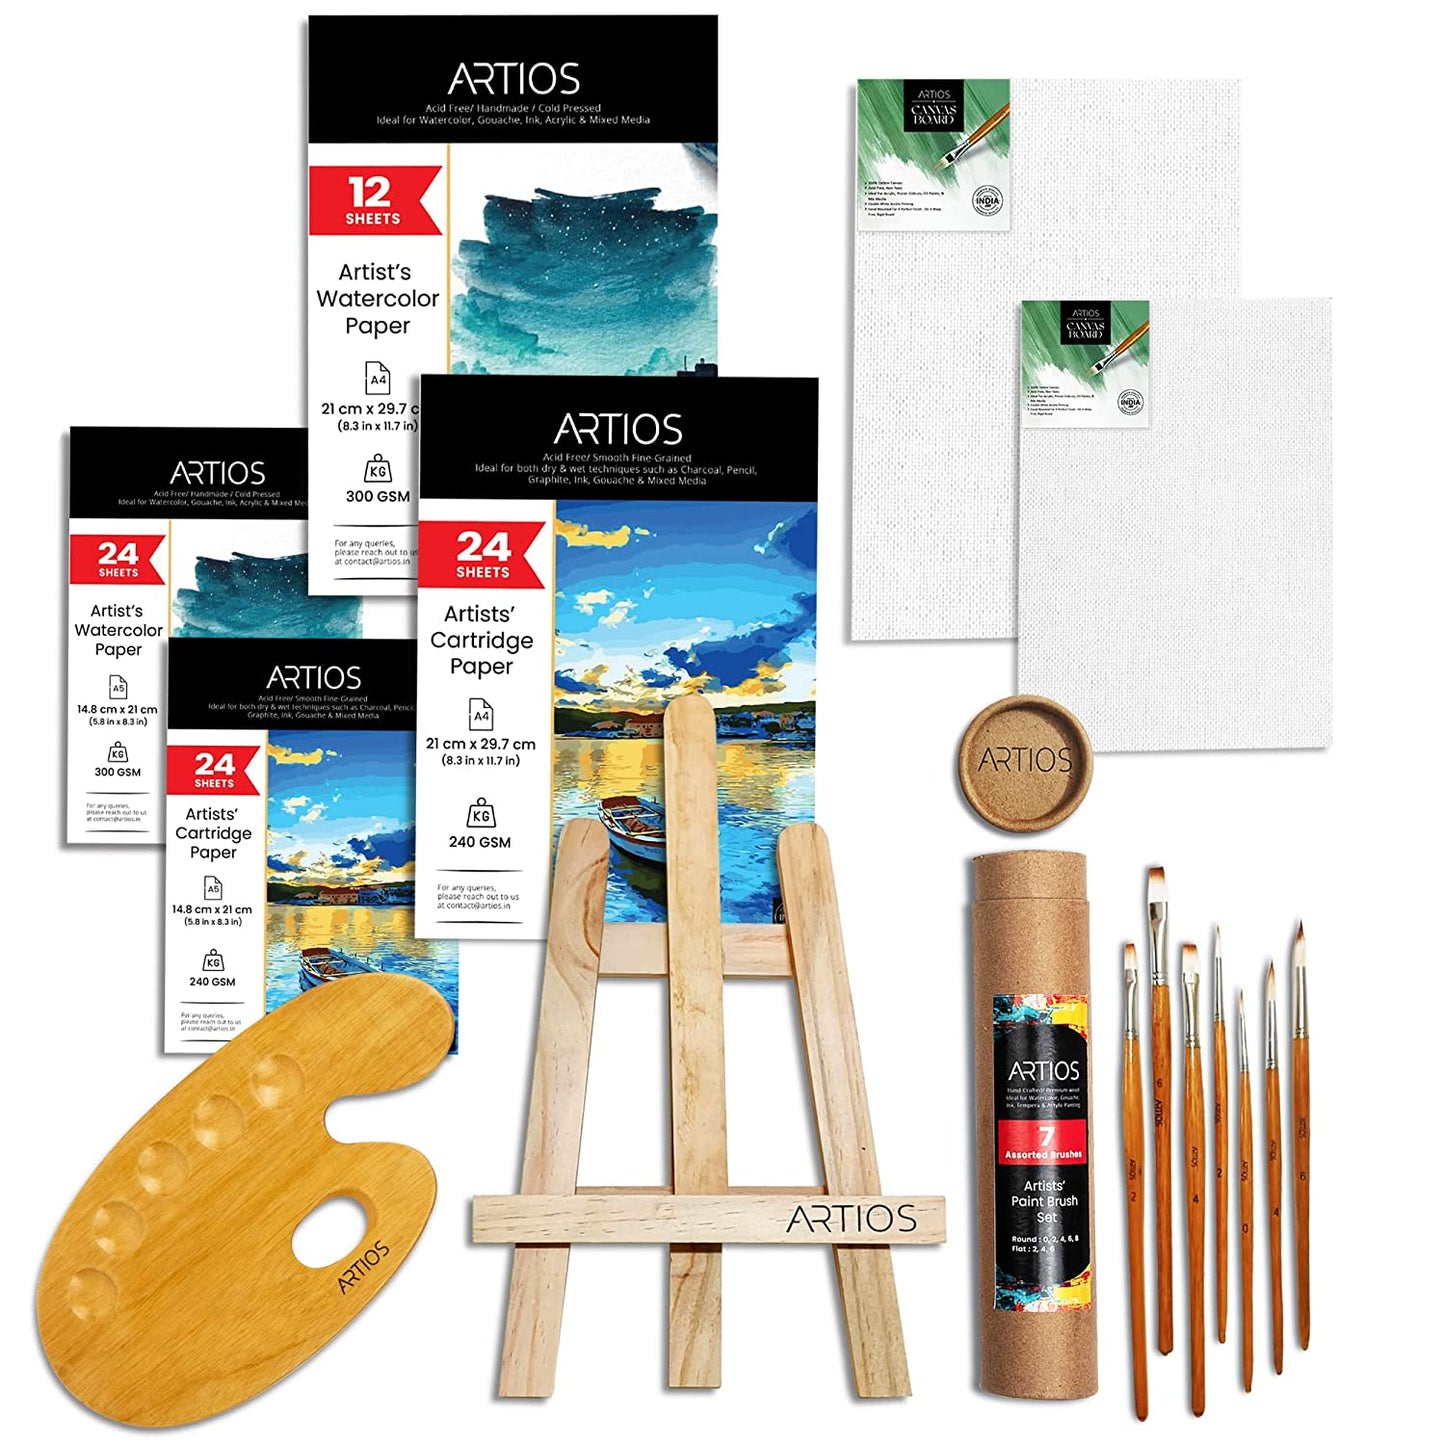 Painting Kit for Artists - 142pcs Painting Set for Adults and Kids